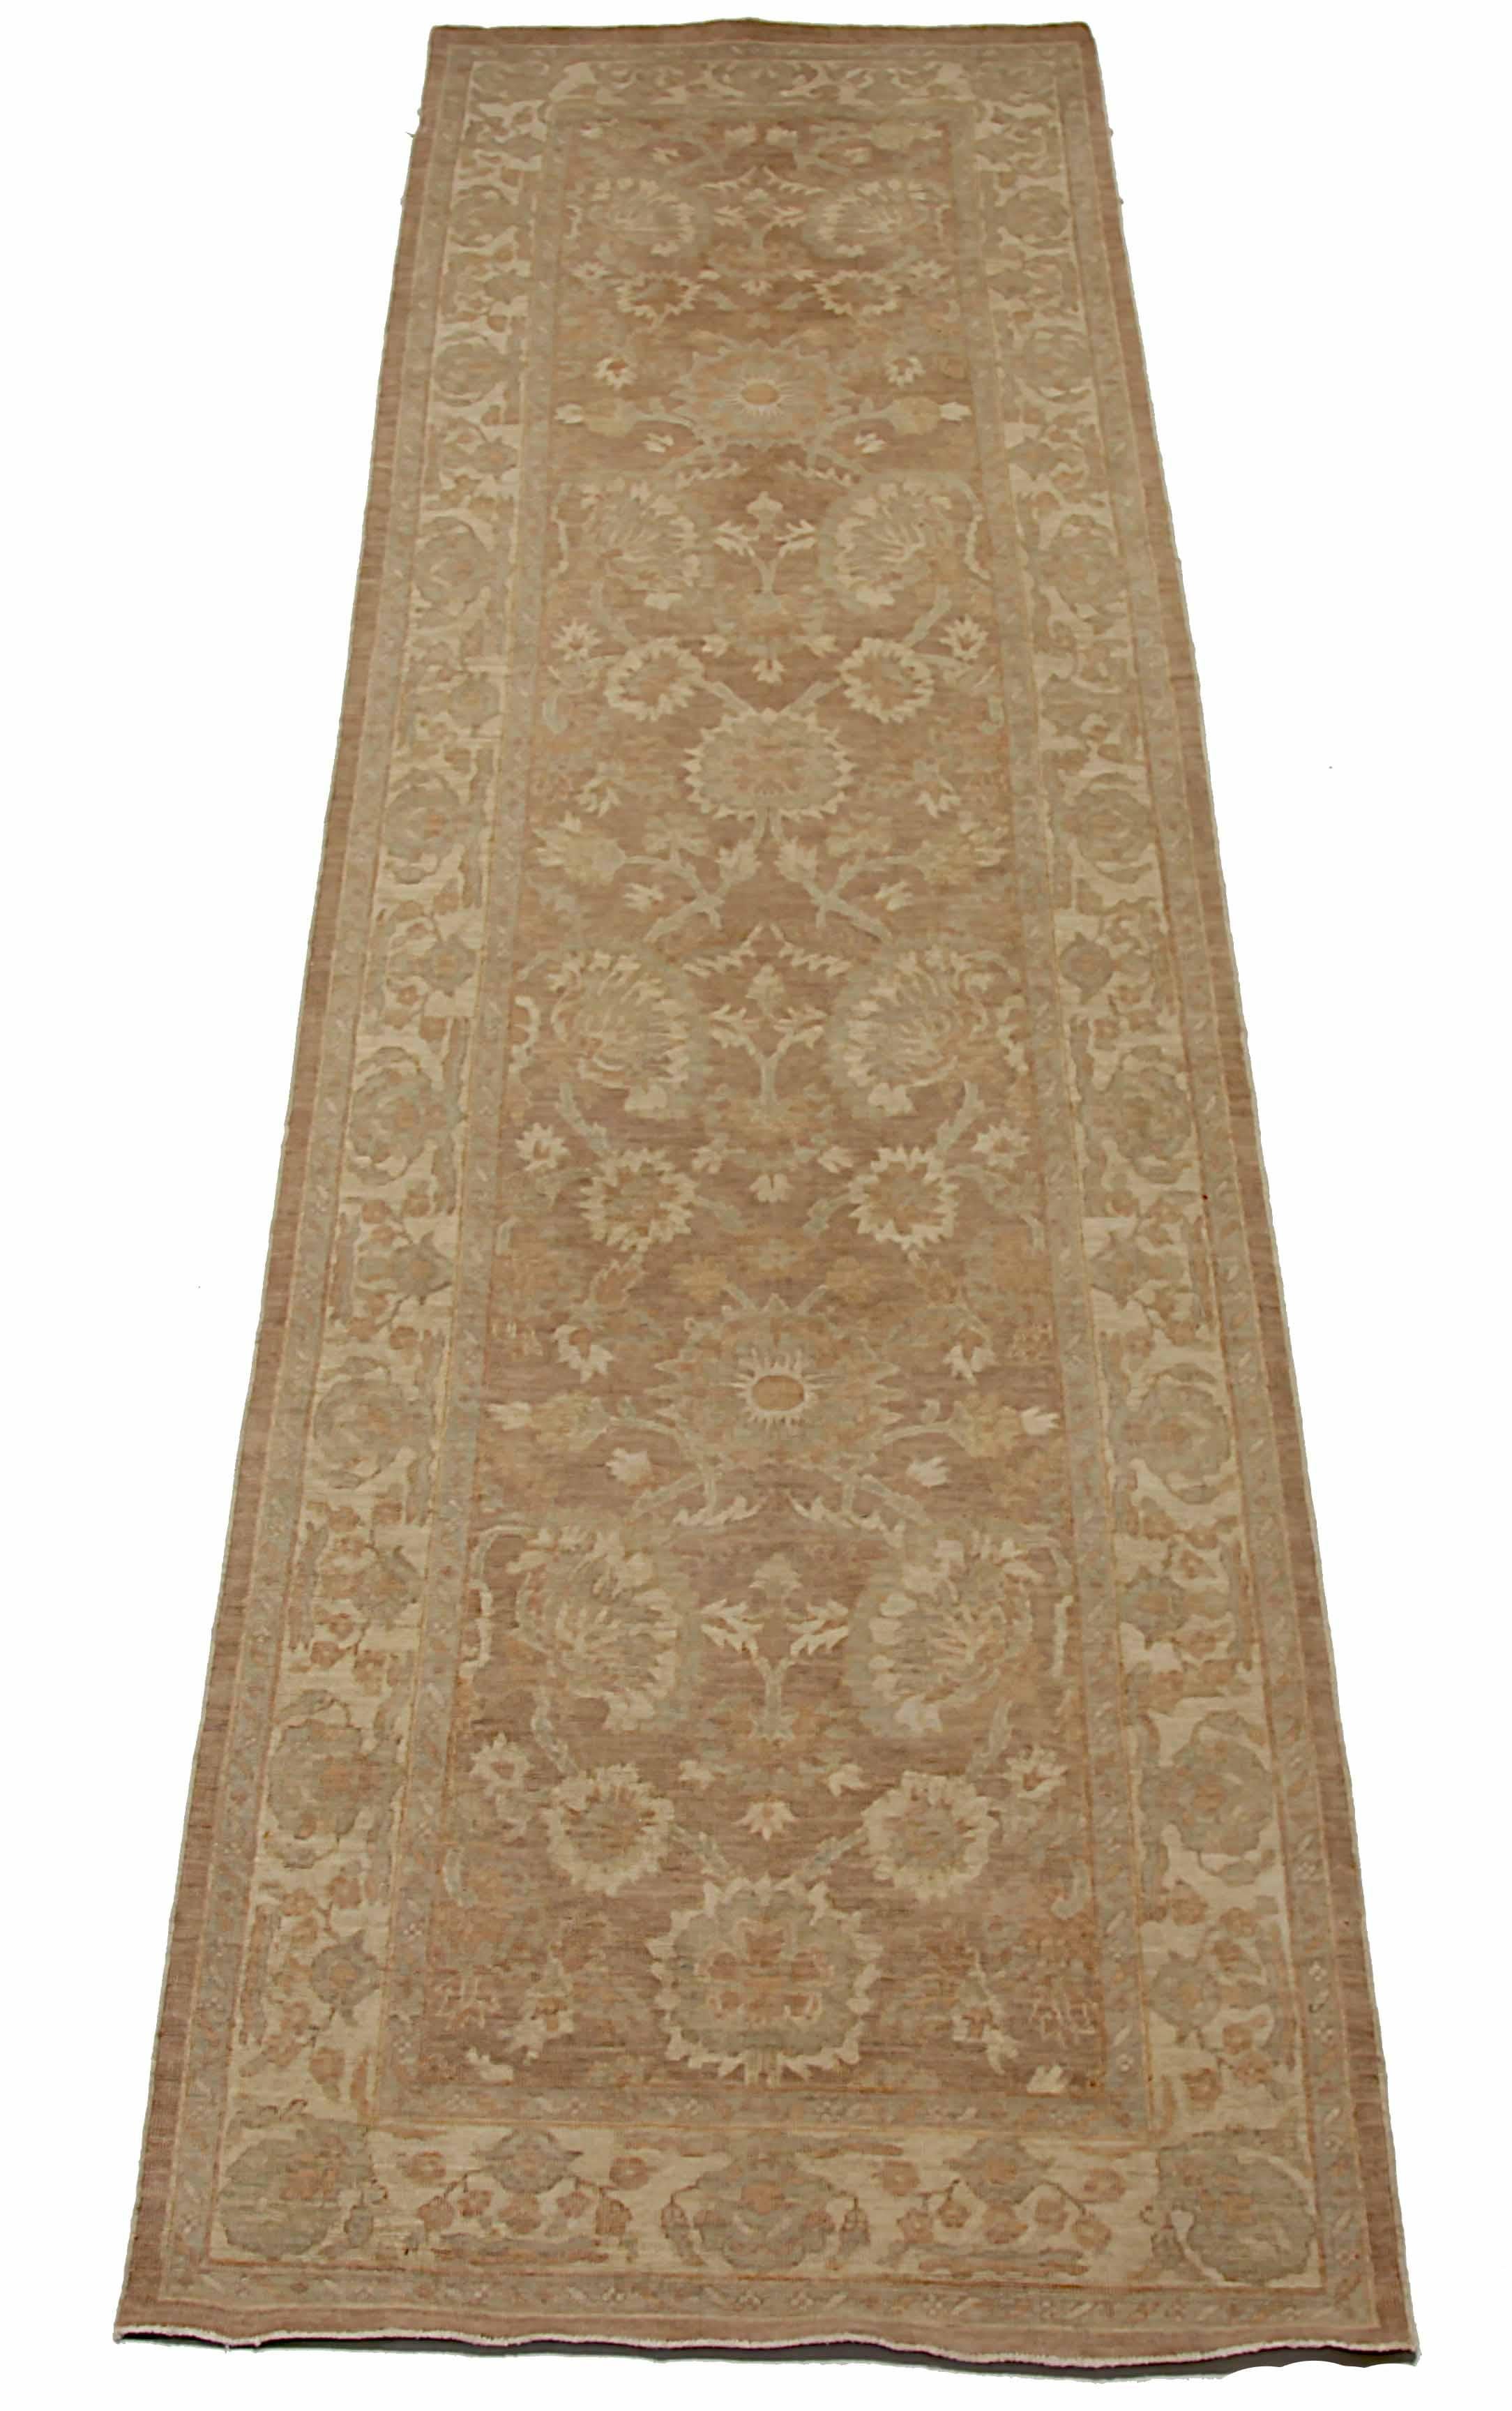 New Afghan runner rug handwoven from the finest sheep’s wool. It’s colored with all-natural vegetable dyes that are safe for humans and pets. It’s a traditional Tabriz design woven by expert artisans. In addition to the fine weaving, this rug